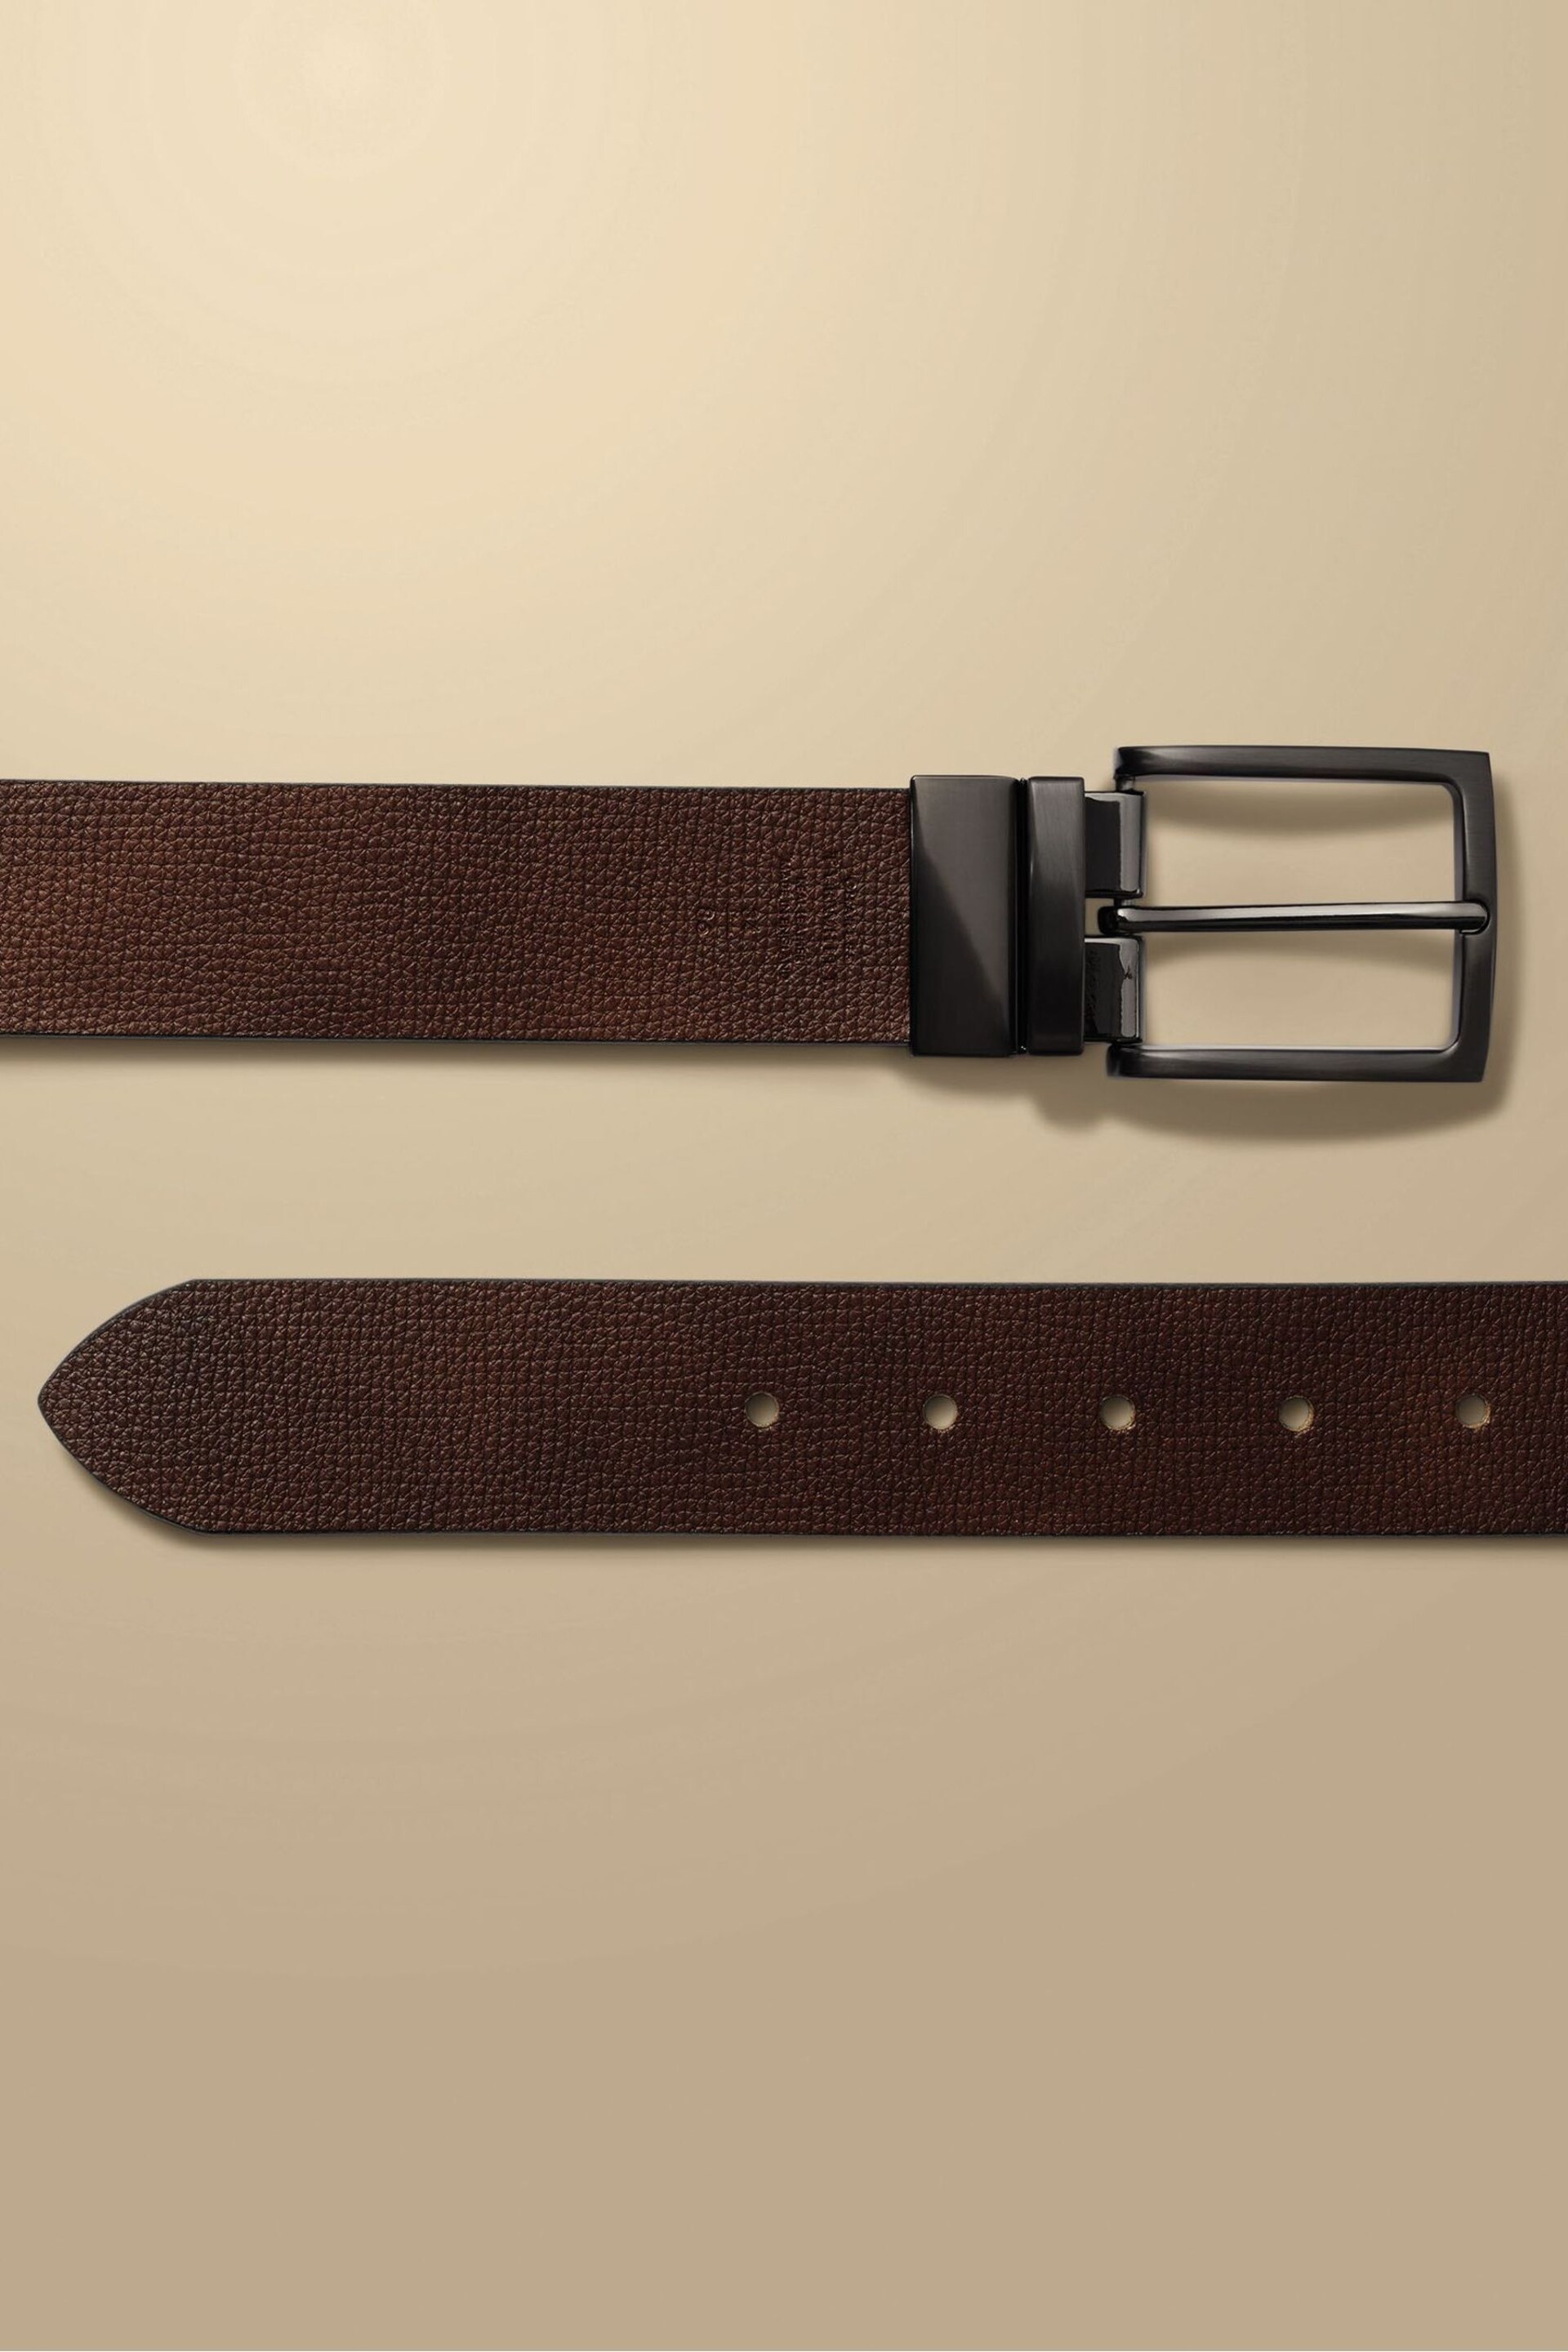 Charles Tyrwhitt Natural Leather Made in England Reversible Chinos Belt - Image 1 of 2